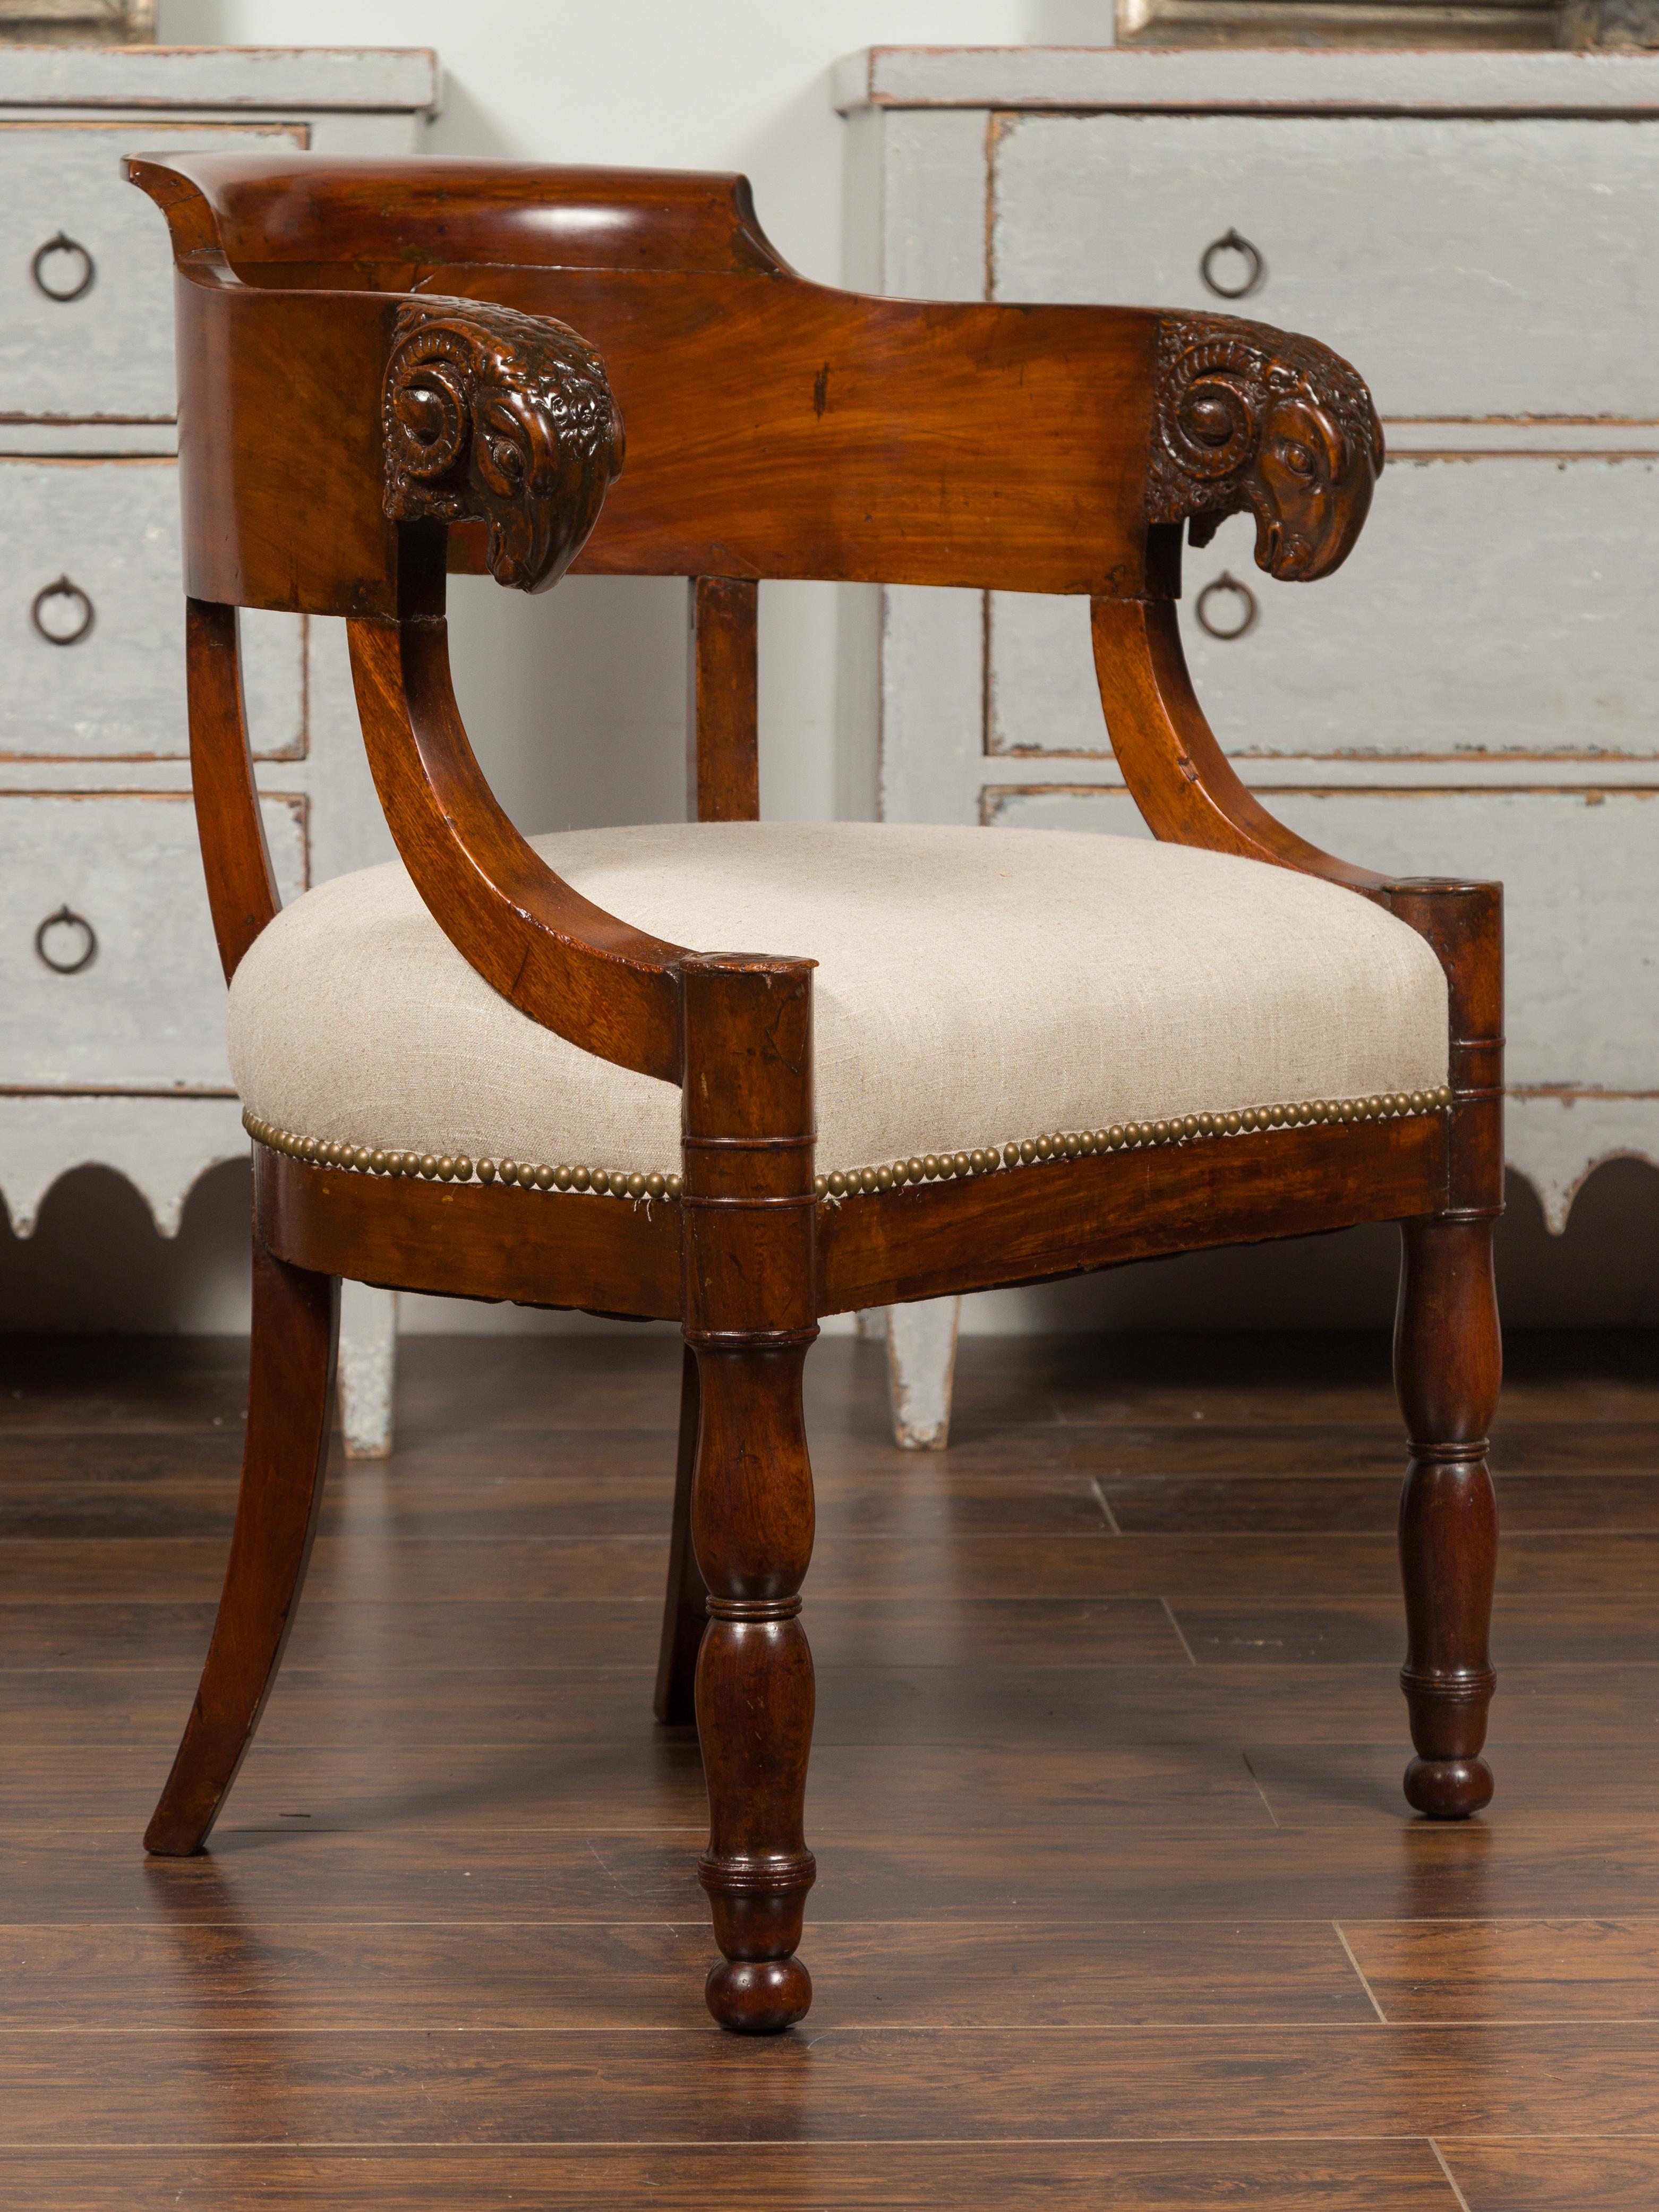 A French Restauration mahogany armchair from the 19th century, with carved rams' heads and new upholstery. Born in France during the Restauration period, this mahogany armchair features a wraparound back adorned with exquisitely carved rams' heads.